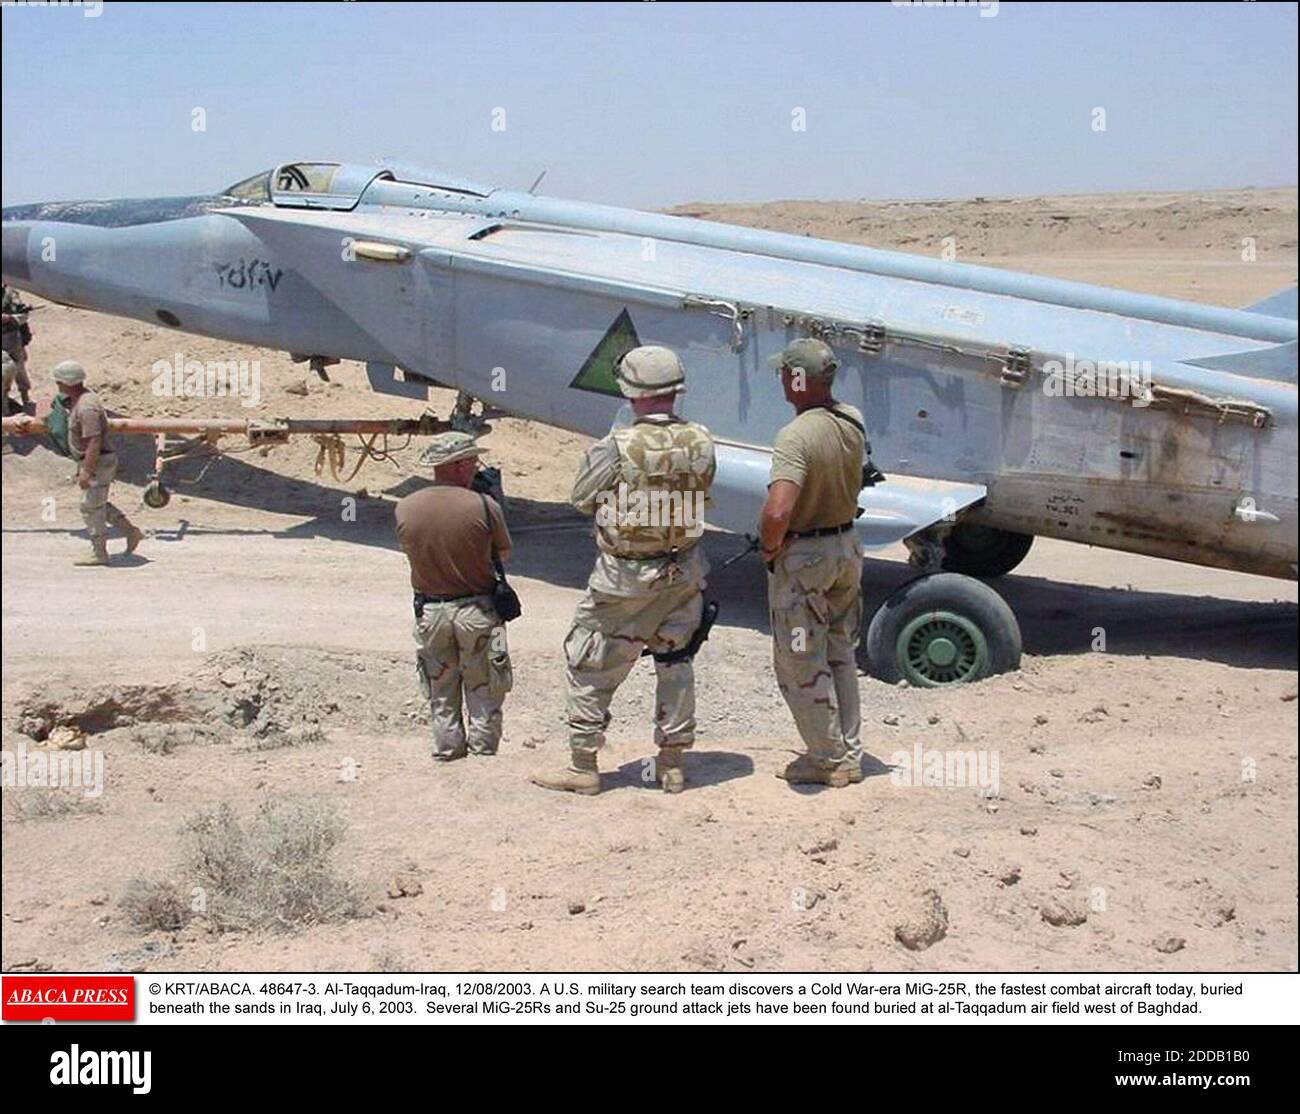 no-film-no-video-no-tv-no-documentary-krtabaca-48647-3-al-taqqadum-iraq-12082003-a-us-military-search-team-discovers-a-cold-war-era-mig-25r-the-fastest-combat-aircraft-today-buried-beneath-the-sands-in-iraq-july-6-2003-several-mig-25rs-and-su-25-ground-attack-jets-have-been-fo-2DDB1B0.jpg